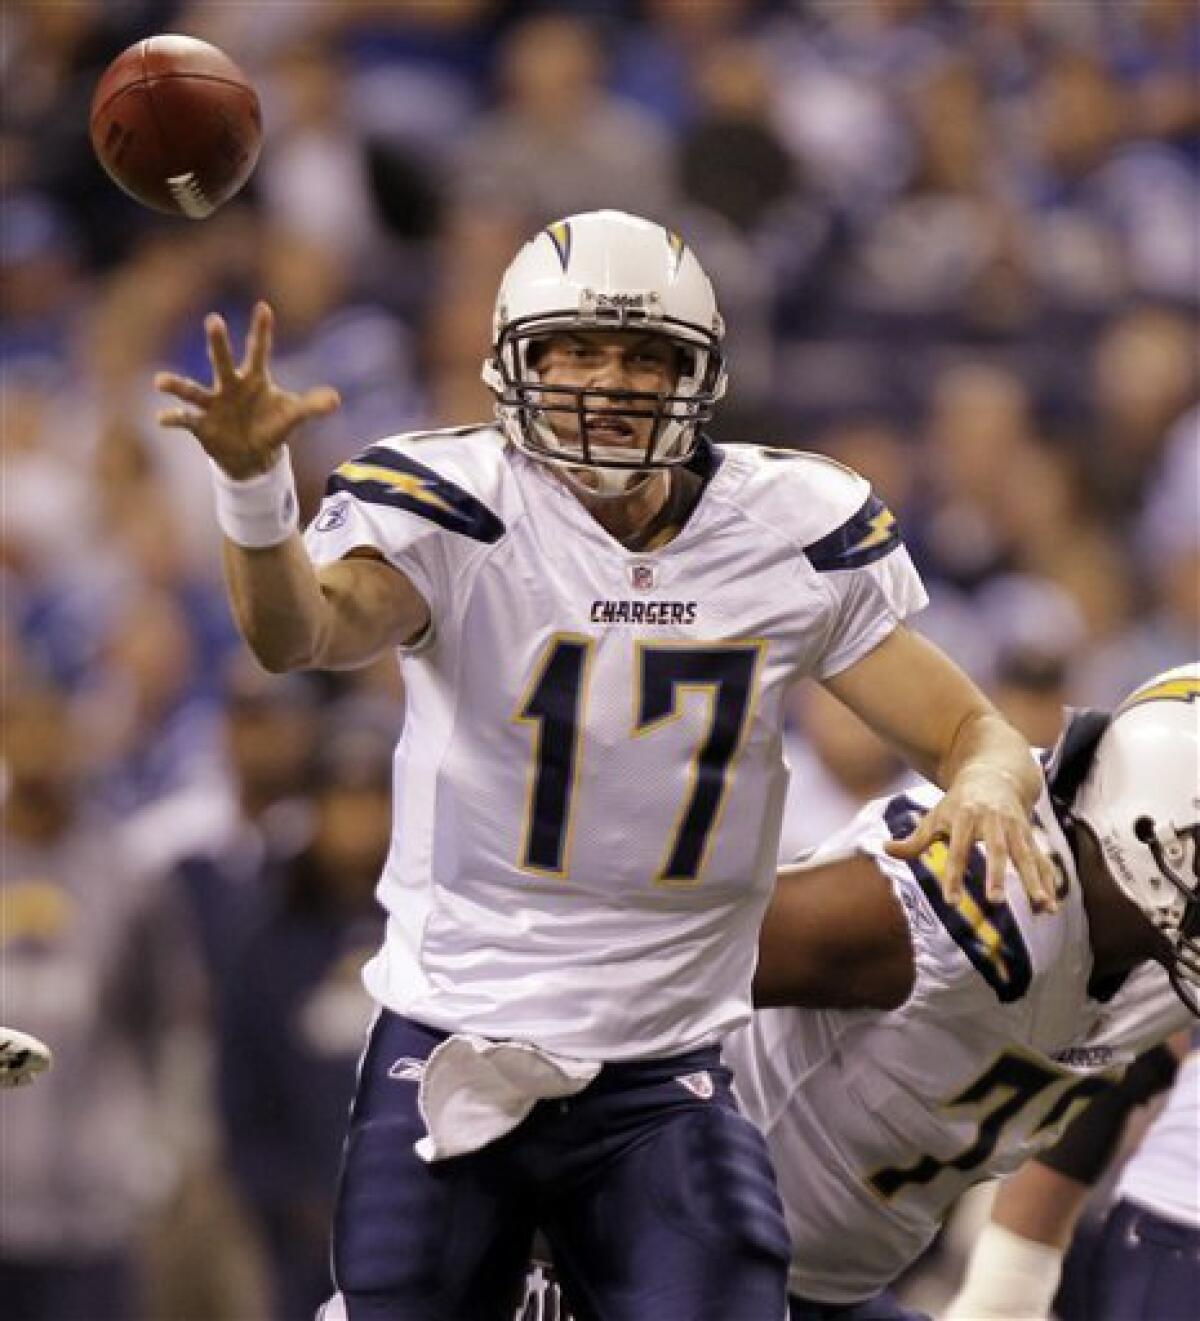 Turnovers help Chargers turn back Colts 36-14 - The San Diego Union-Tribune